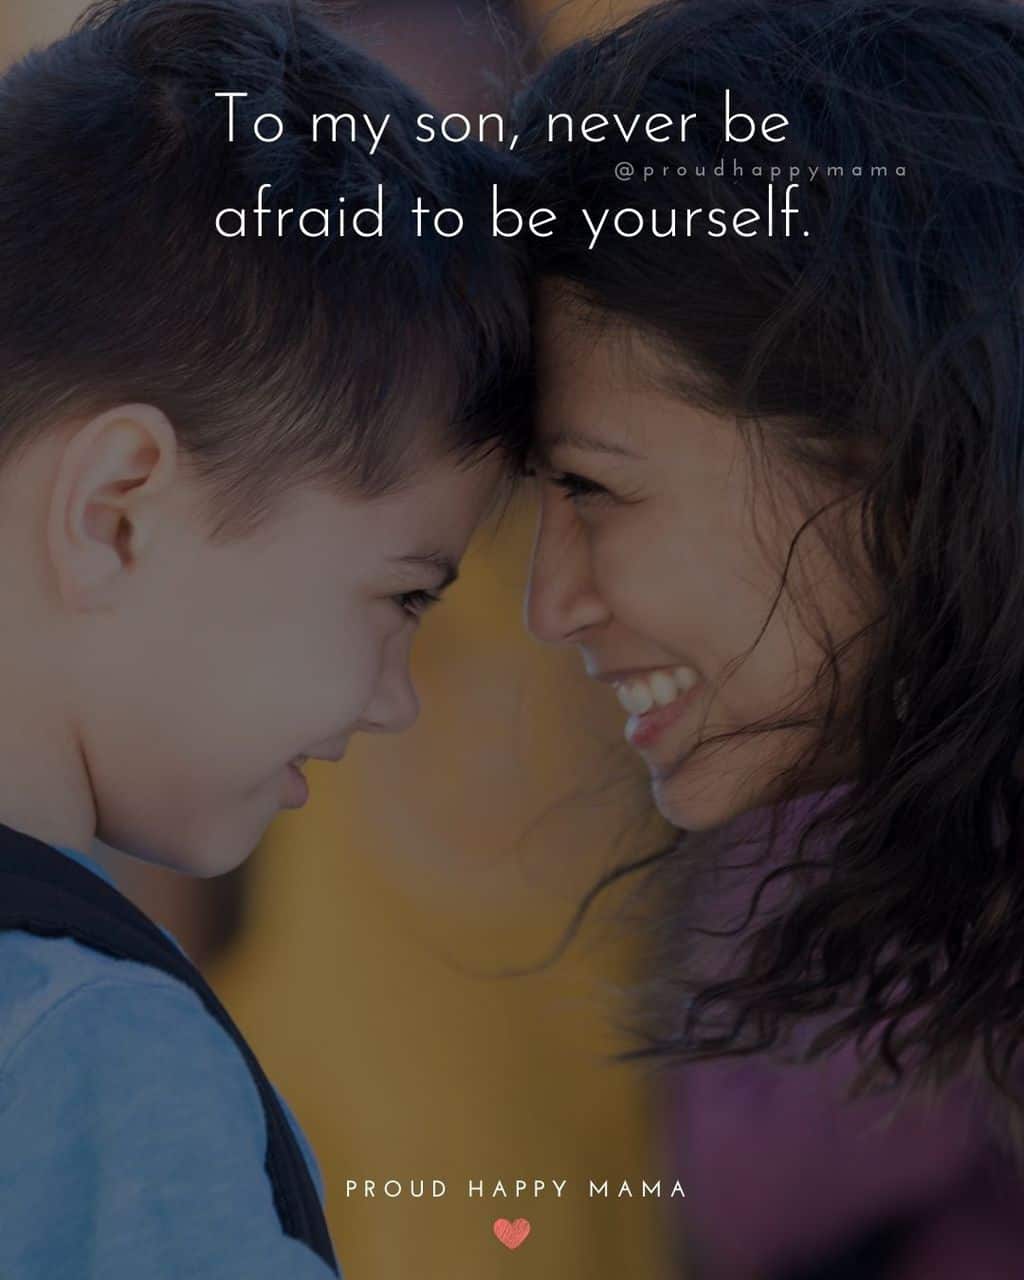 Son Quotes - To my son, never be afraid to be yourself.’